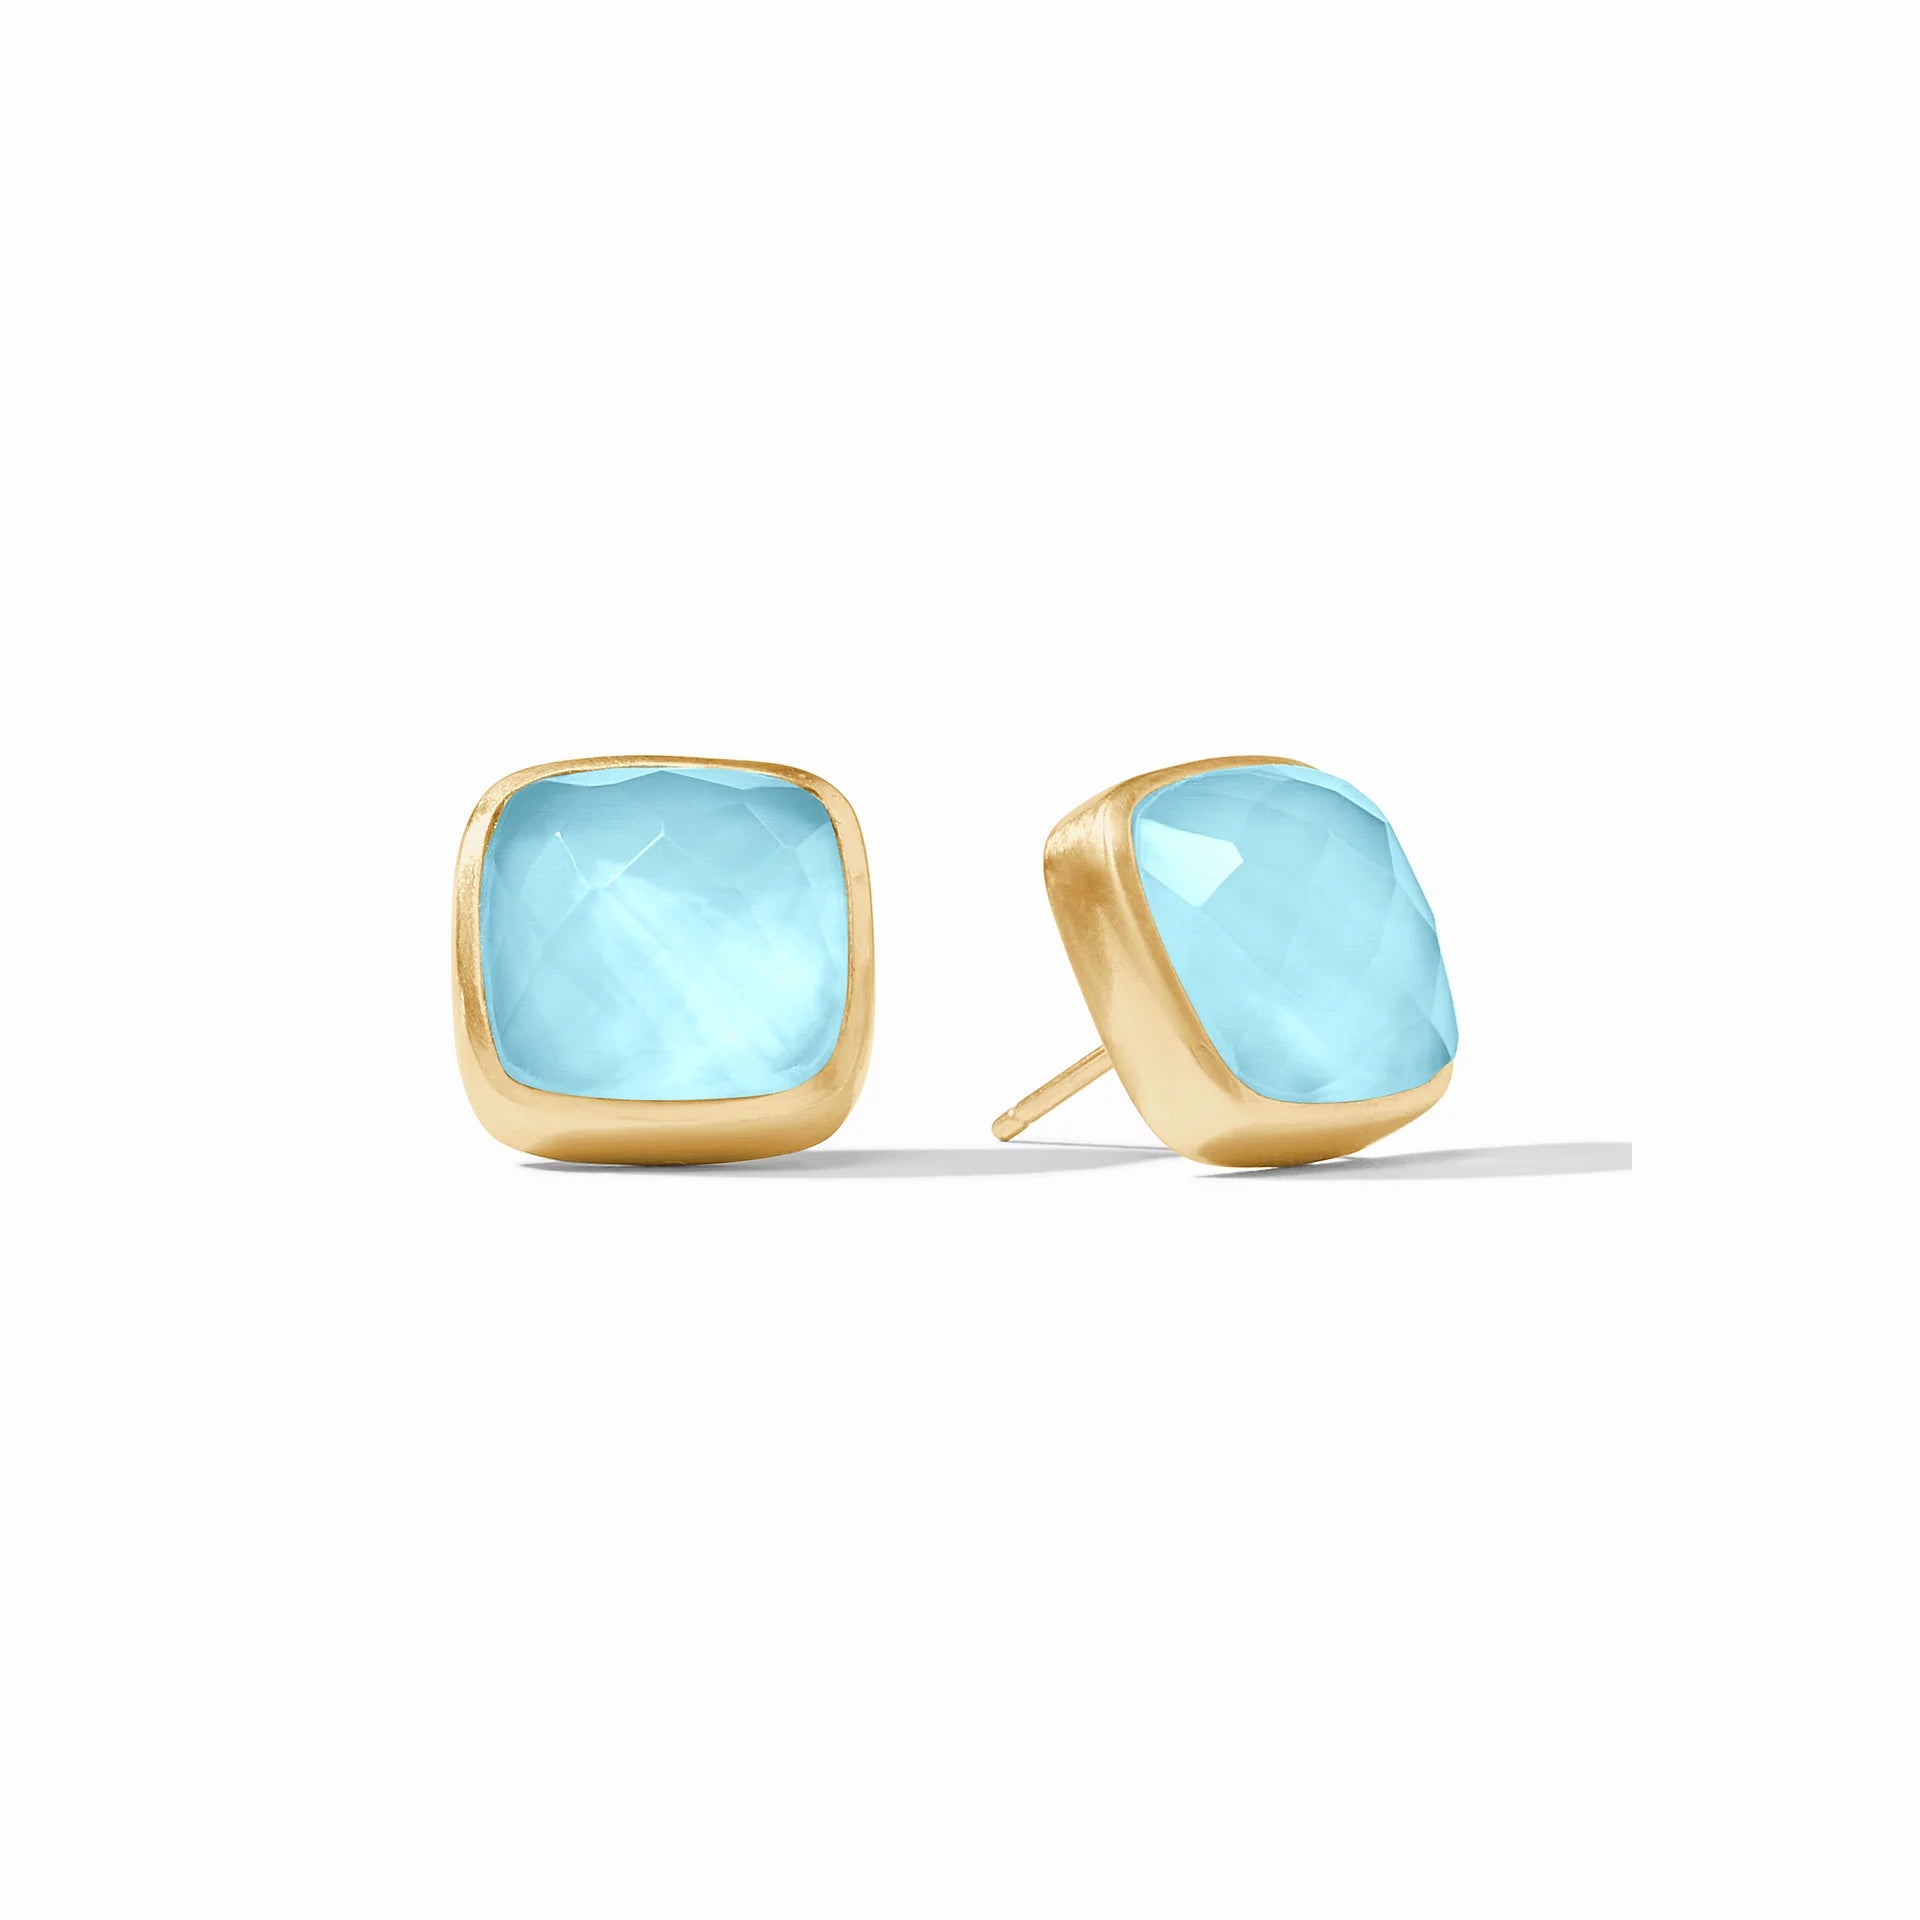 Julie Vos | Catalina Stud Earrings with Capri Blue Crystals in Gold - Giddy Up Glamour Boutique